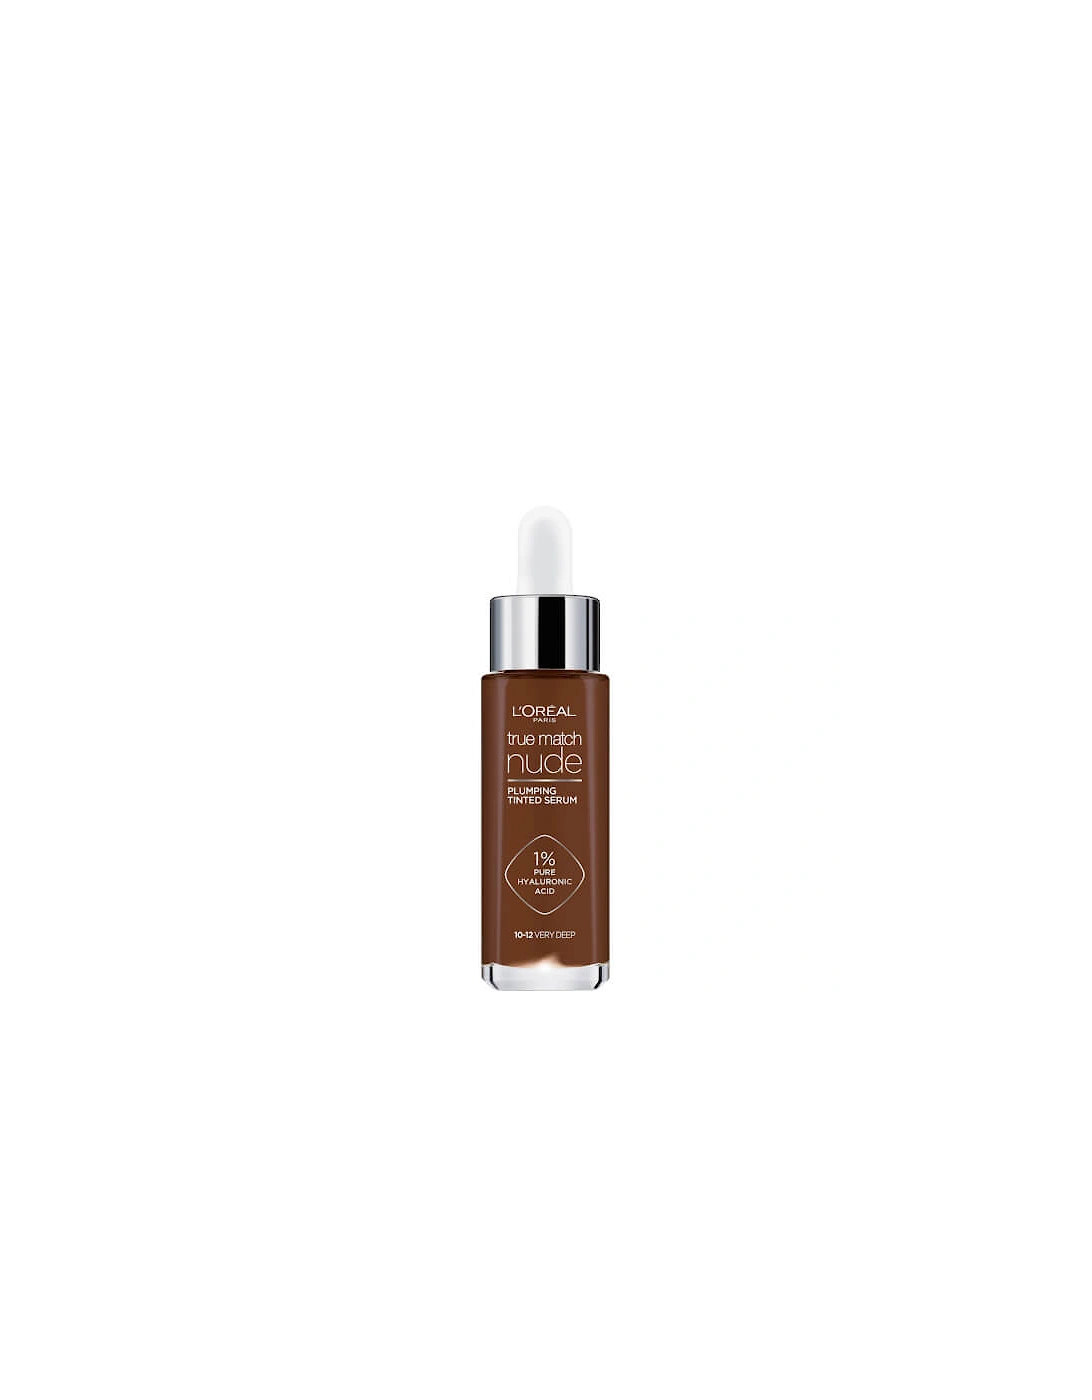 Paris True Match Nude Plumping Tinted Serum Shade 10-12 - Paris - Paris True Match Nude Plumping Tinted Serum (Various Shades) - Tracy, 2 of 1